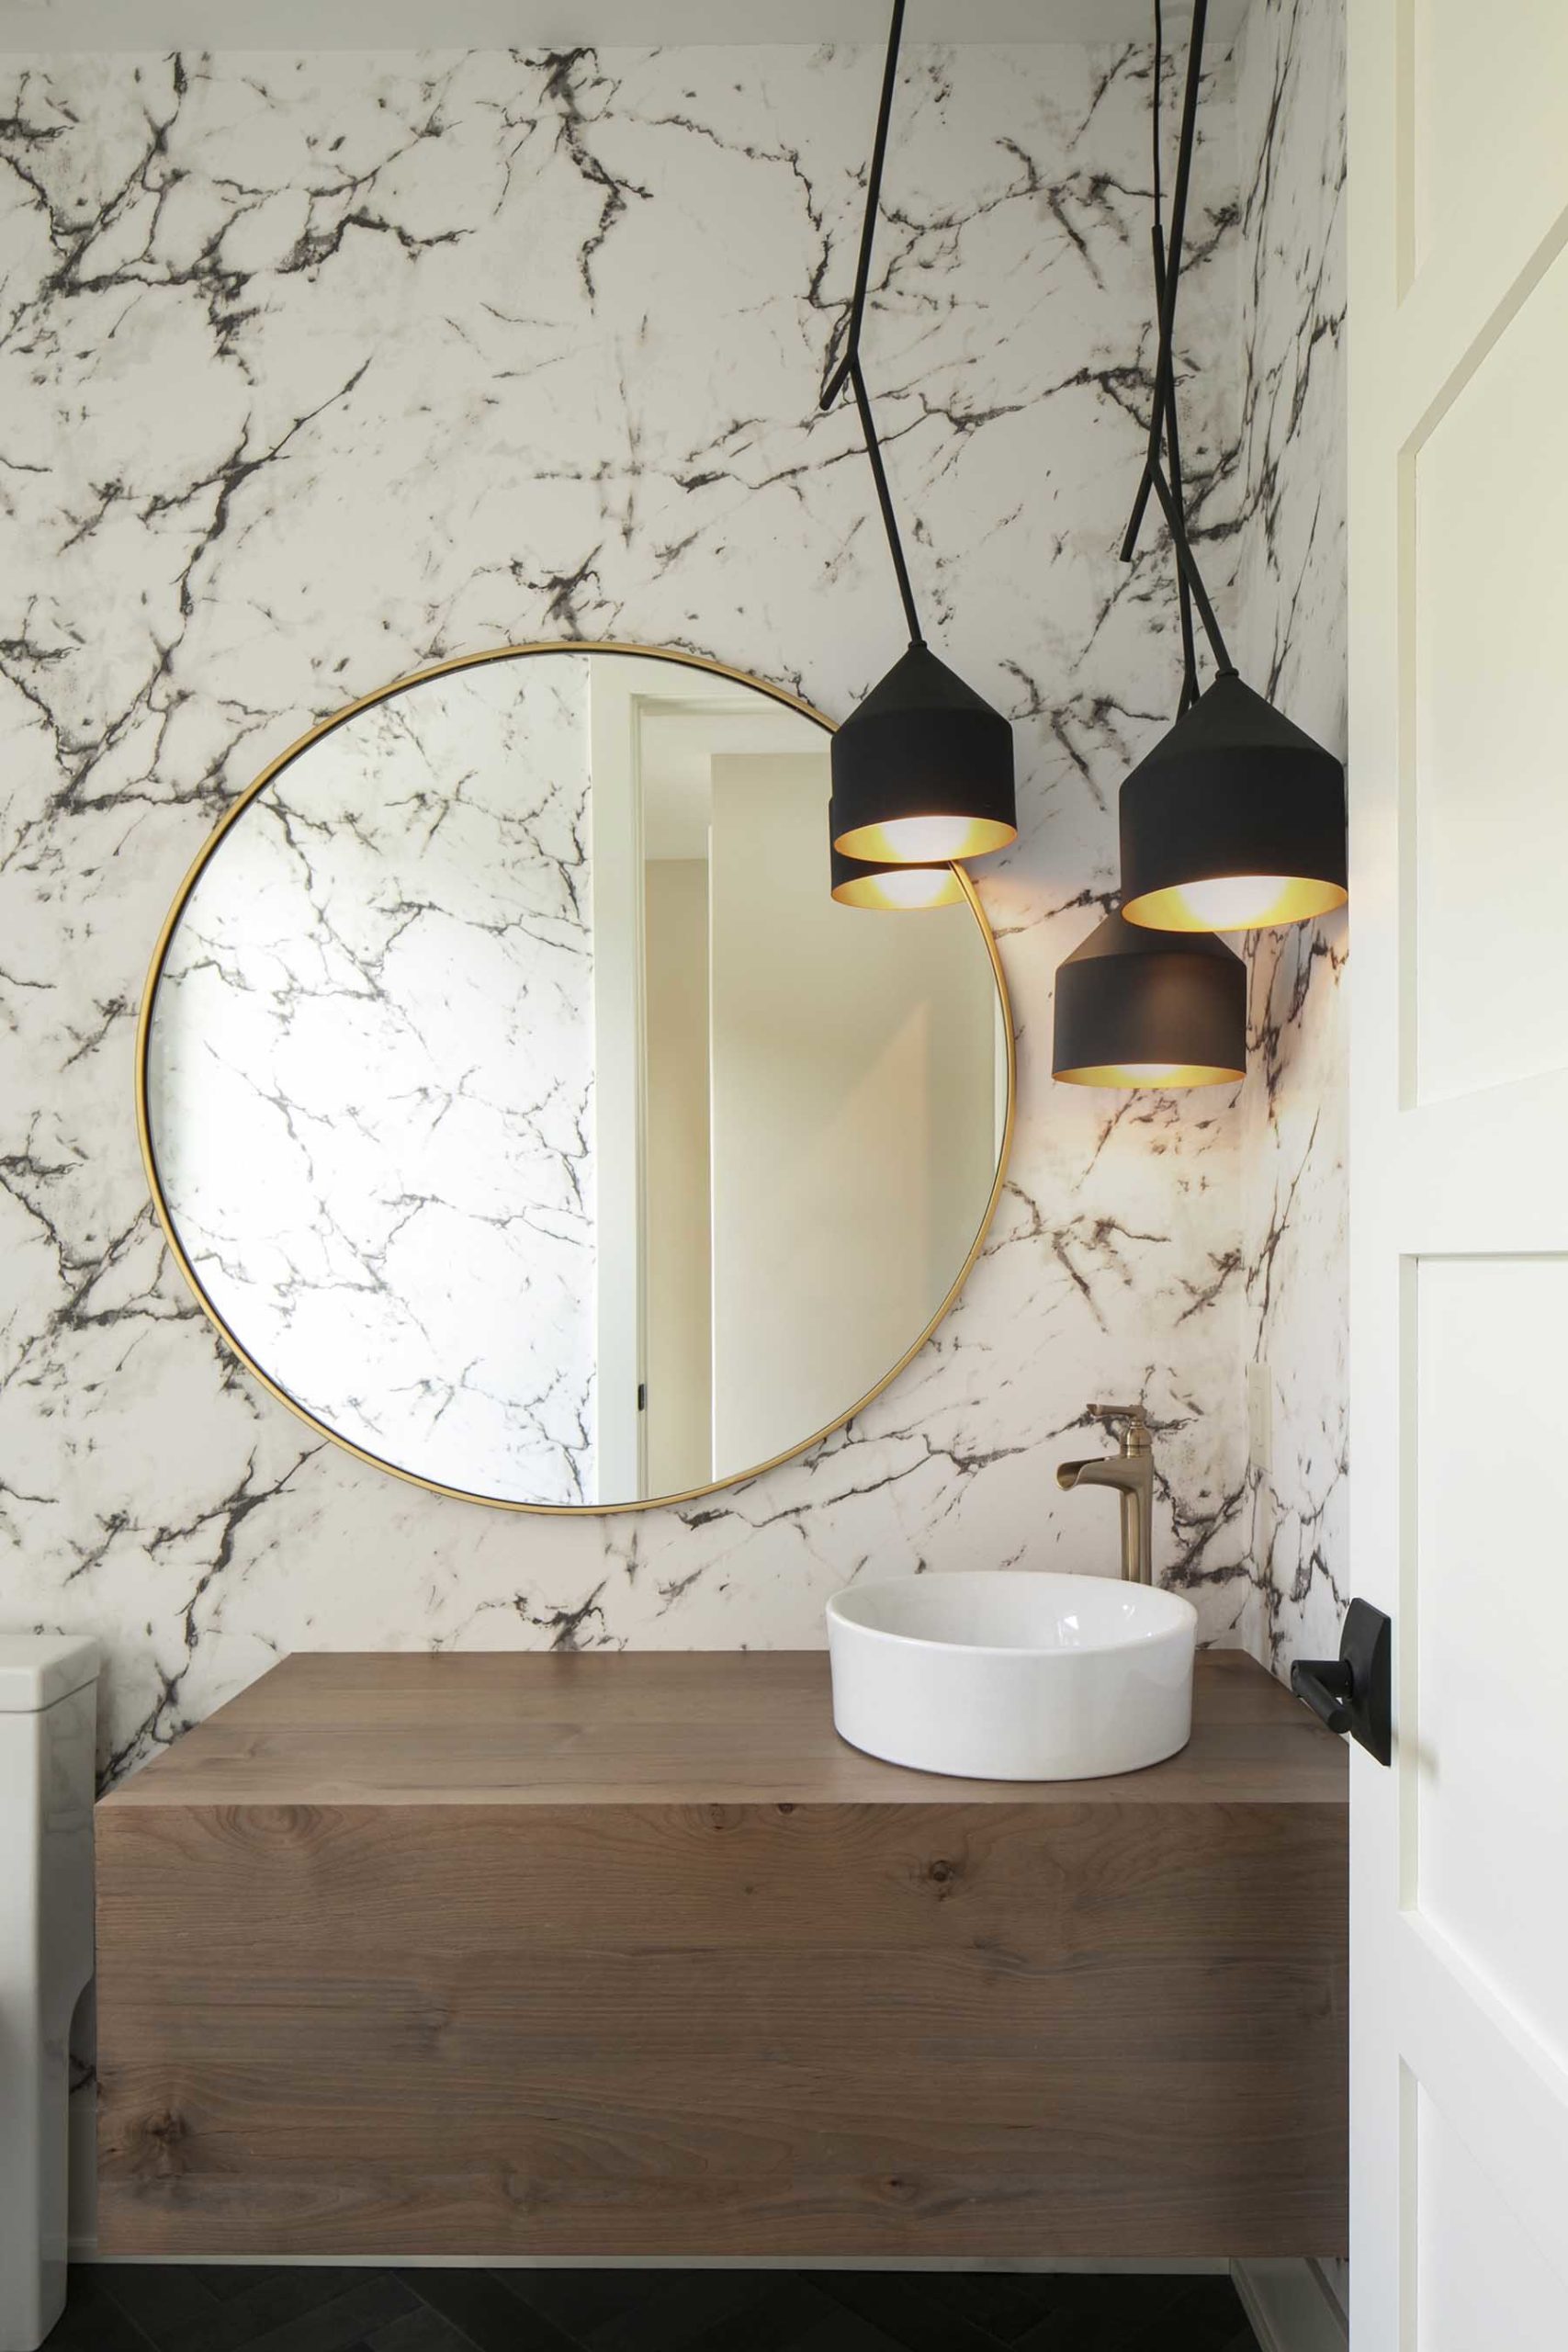 A bathroom with marble walls and a wooden vanity.